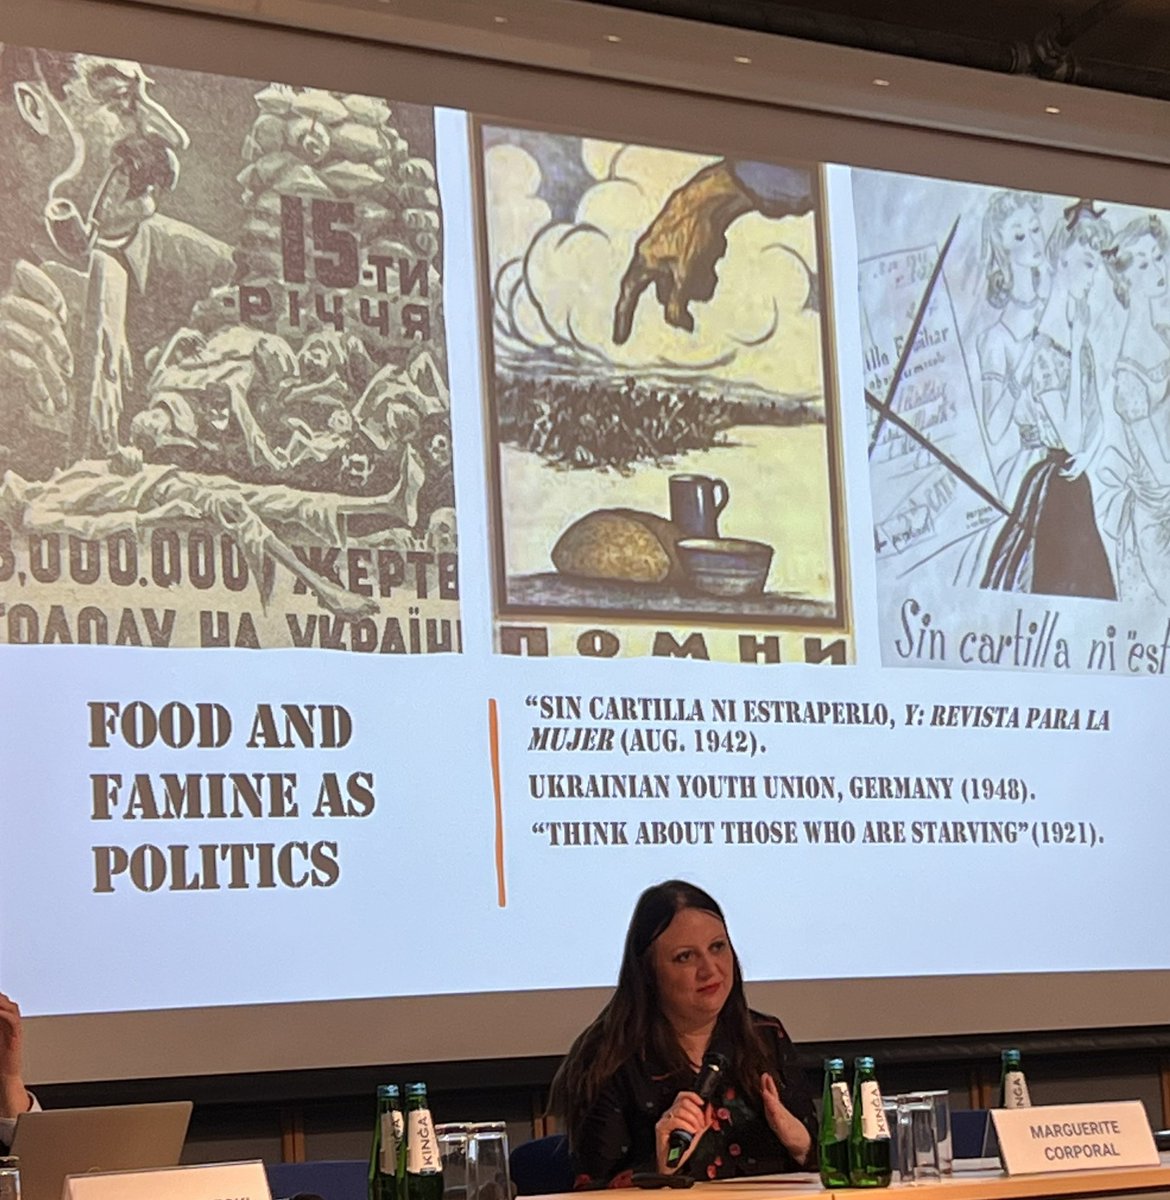 A great keynote 'Heritage of Hunger in Europe: The Past and Present Politics of Embodying Disaster’ by @m_corporaal at the 13th Genealogies of Memory conf ’Pandemics, famines and industrial disasters of the 20th and 21st centuries’ organized by @enrs_eu . Two more days to go!